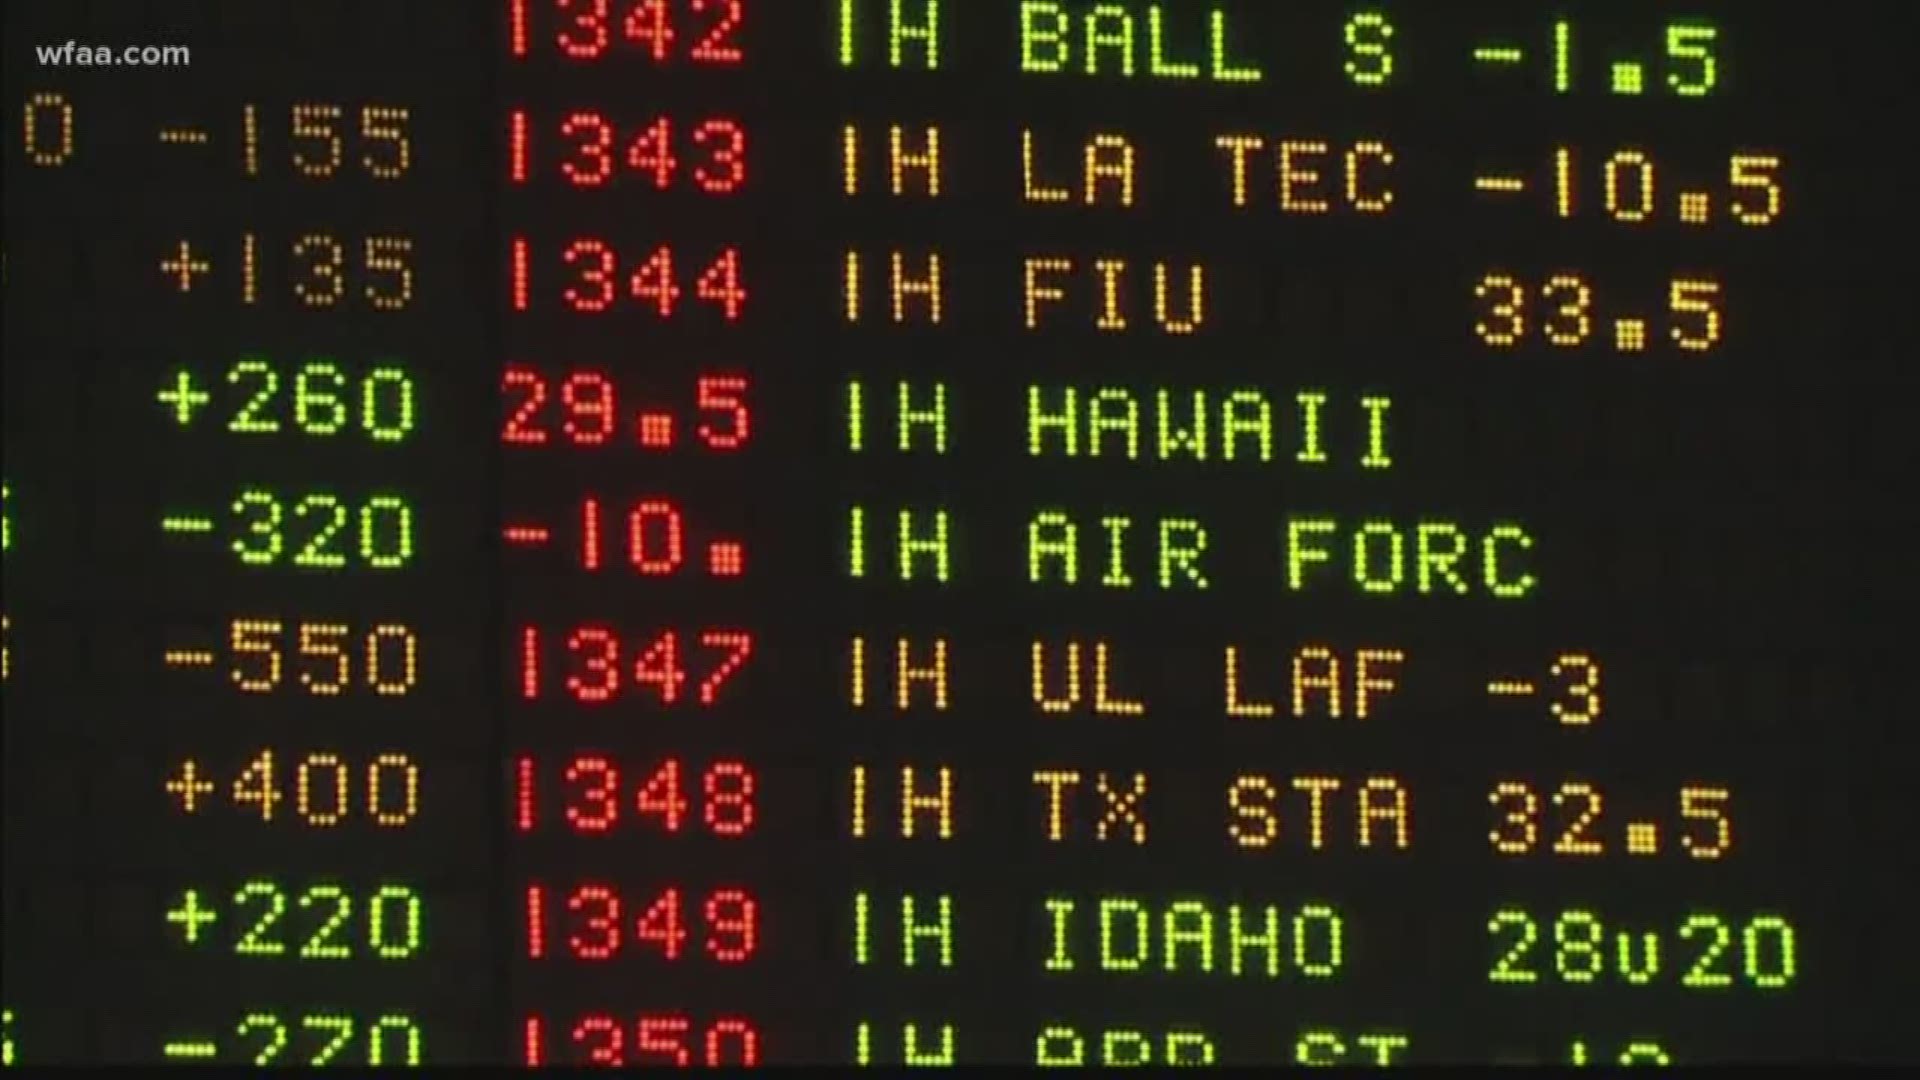 Is sports betting legal in hawaii today